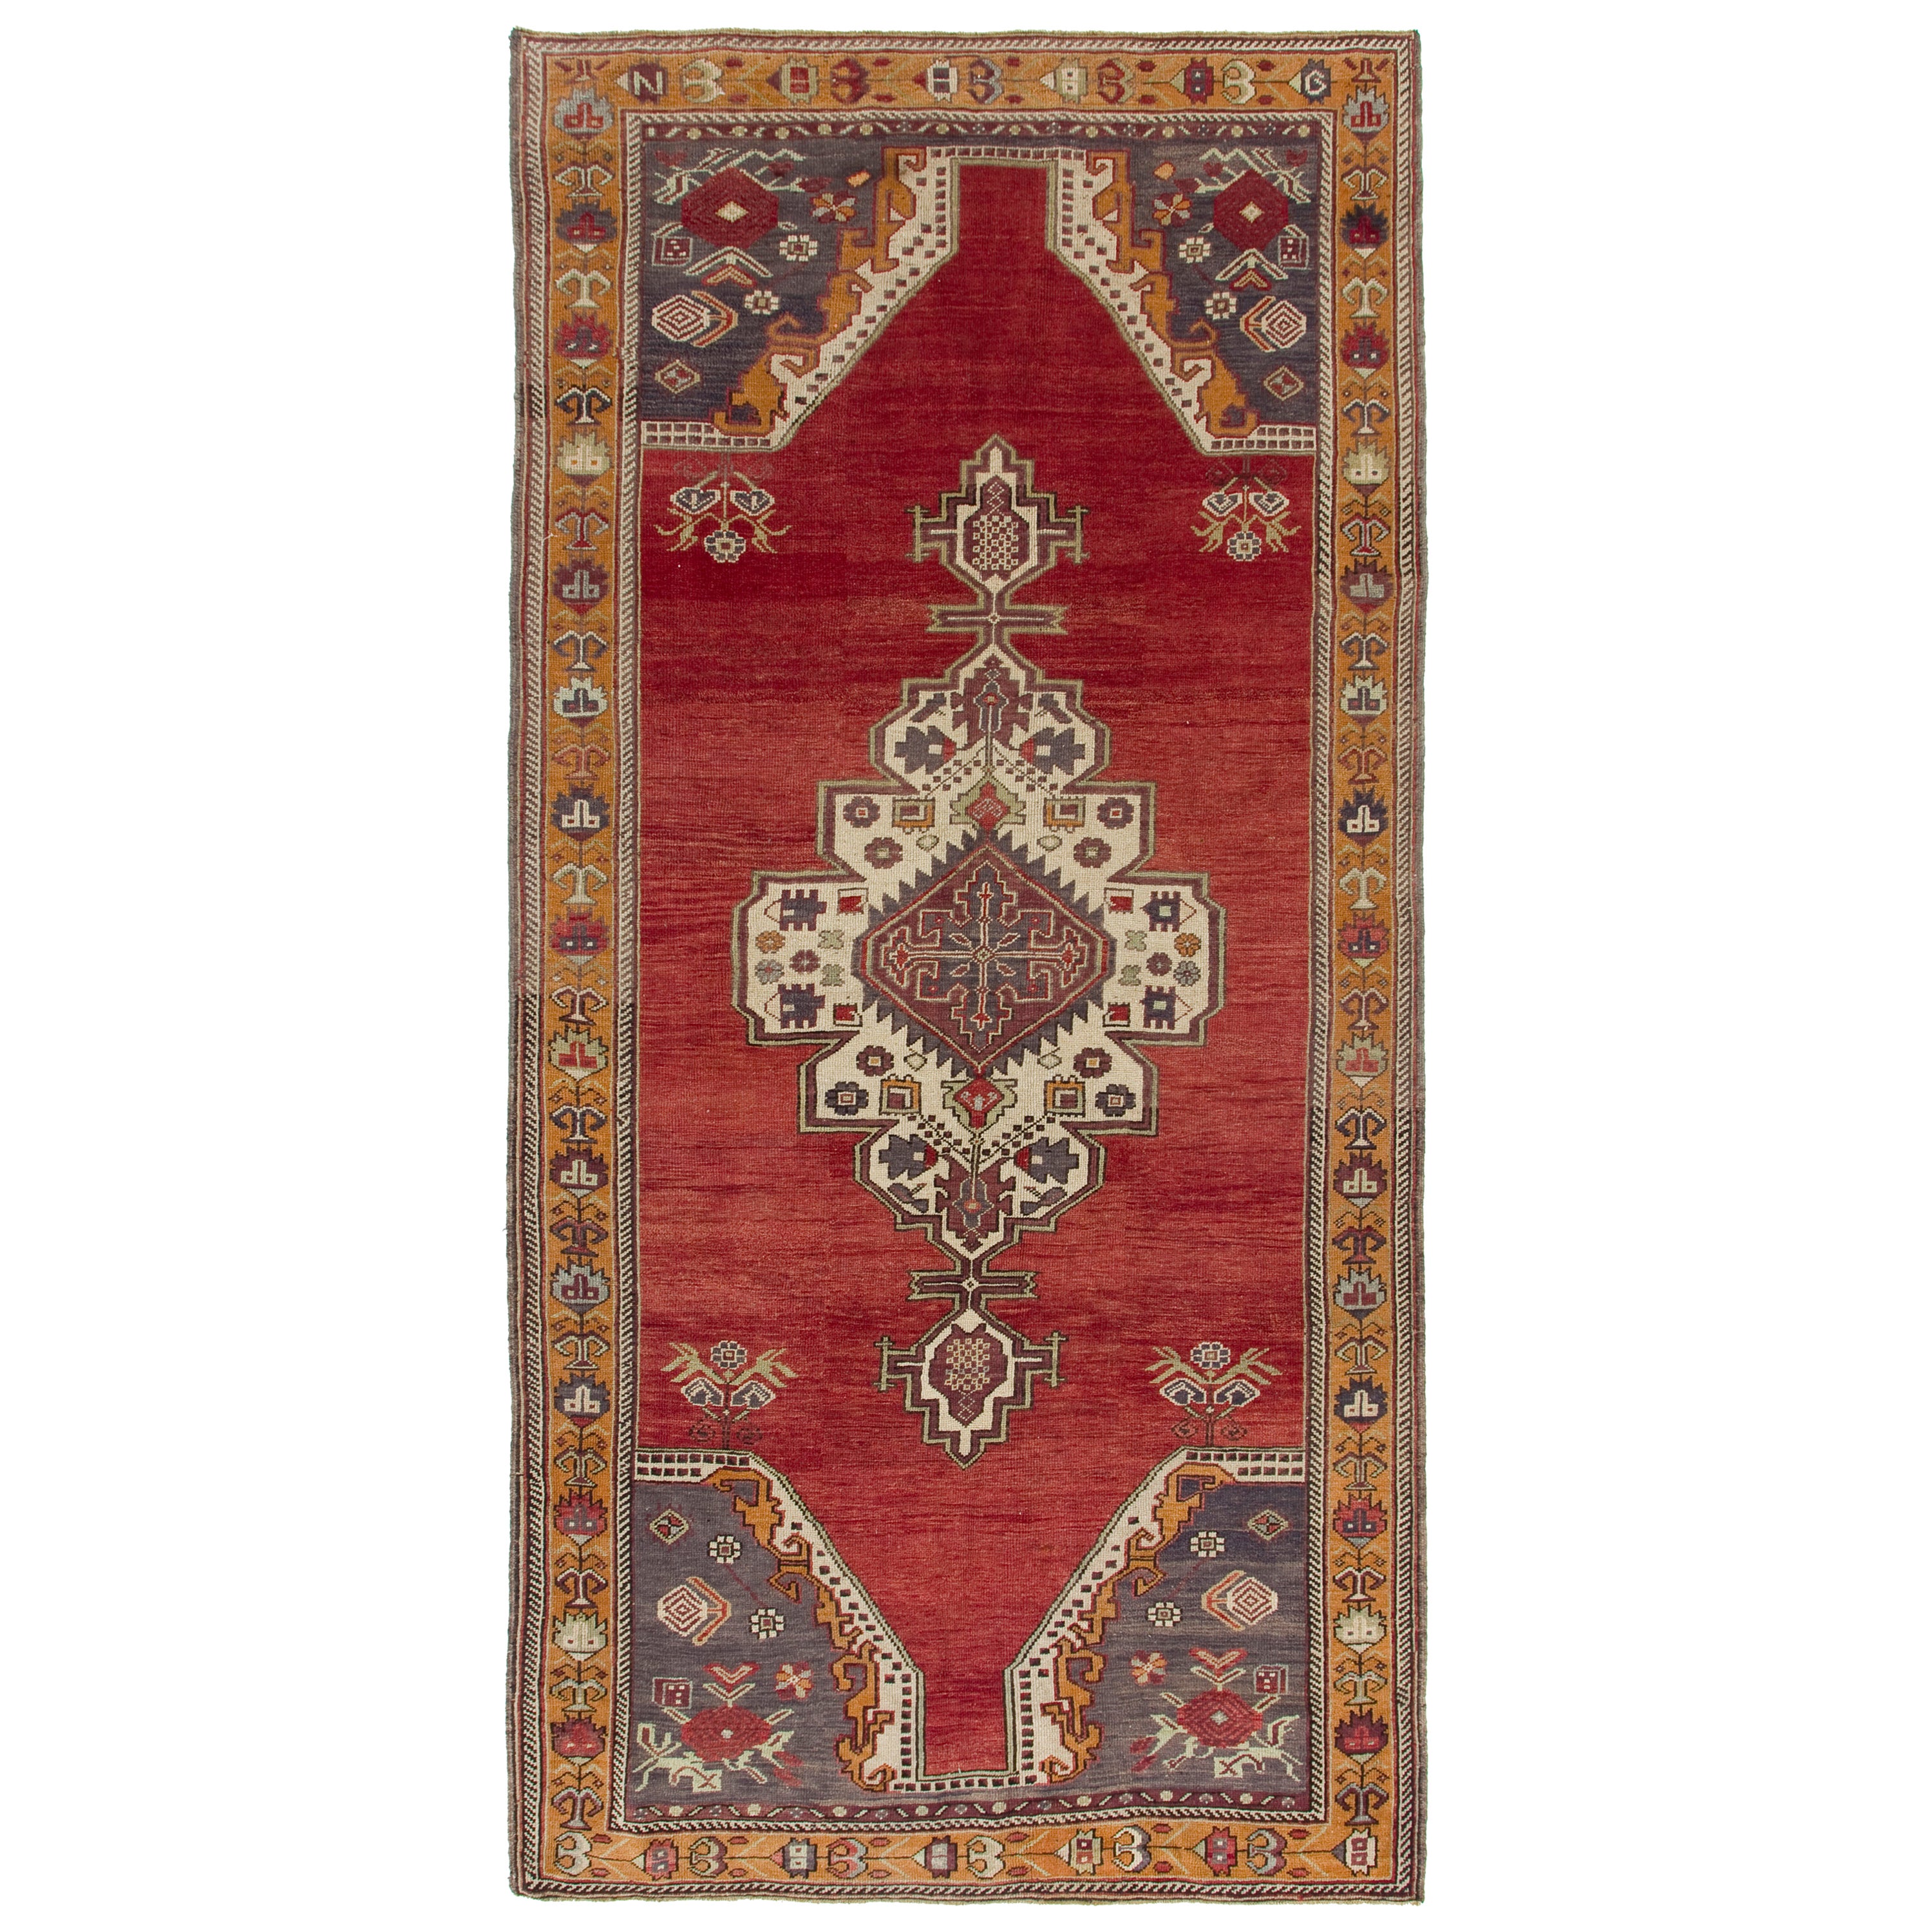 6x12 Ft One-of-a-Kind Vintage Handmade Turkish Rug in Red, Indigo and Marigold For Sale